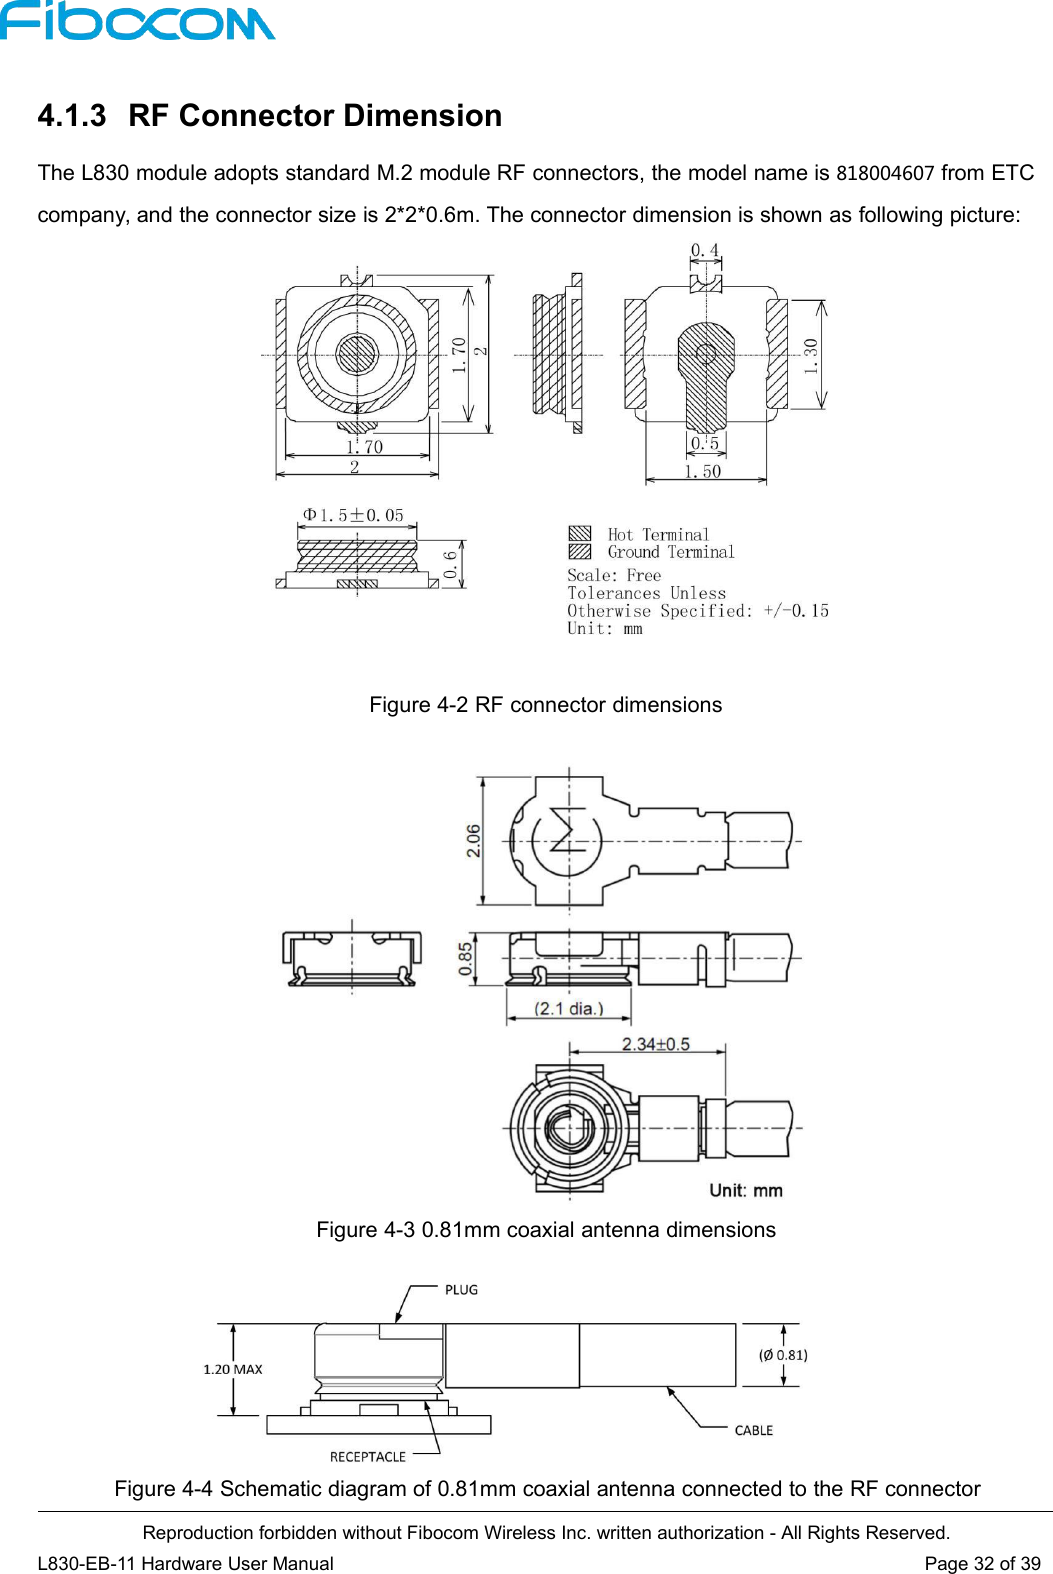 Reproduction forbidden without Fibocom Wireless Inc. written authorization - All Rights Reserved.L830-EB-11 Hardware User Manual Page 32 of 394.1.3 RF Connector DimensionThe L830 module adopts standard M.2 module RF connectors, the model name is 818004607 from ETCcompany, and the connector size is 2*2*0.6m. The connector dimension is shown as following picture:Figure 4-2 RF connector dimensionsFigure 4-3 0.81mm coaxial antenna dimensionsFigure 4-4 Schematic diagram of 0.81mm coaxial antenna connected to the RF connector